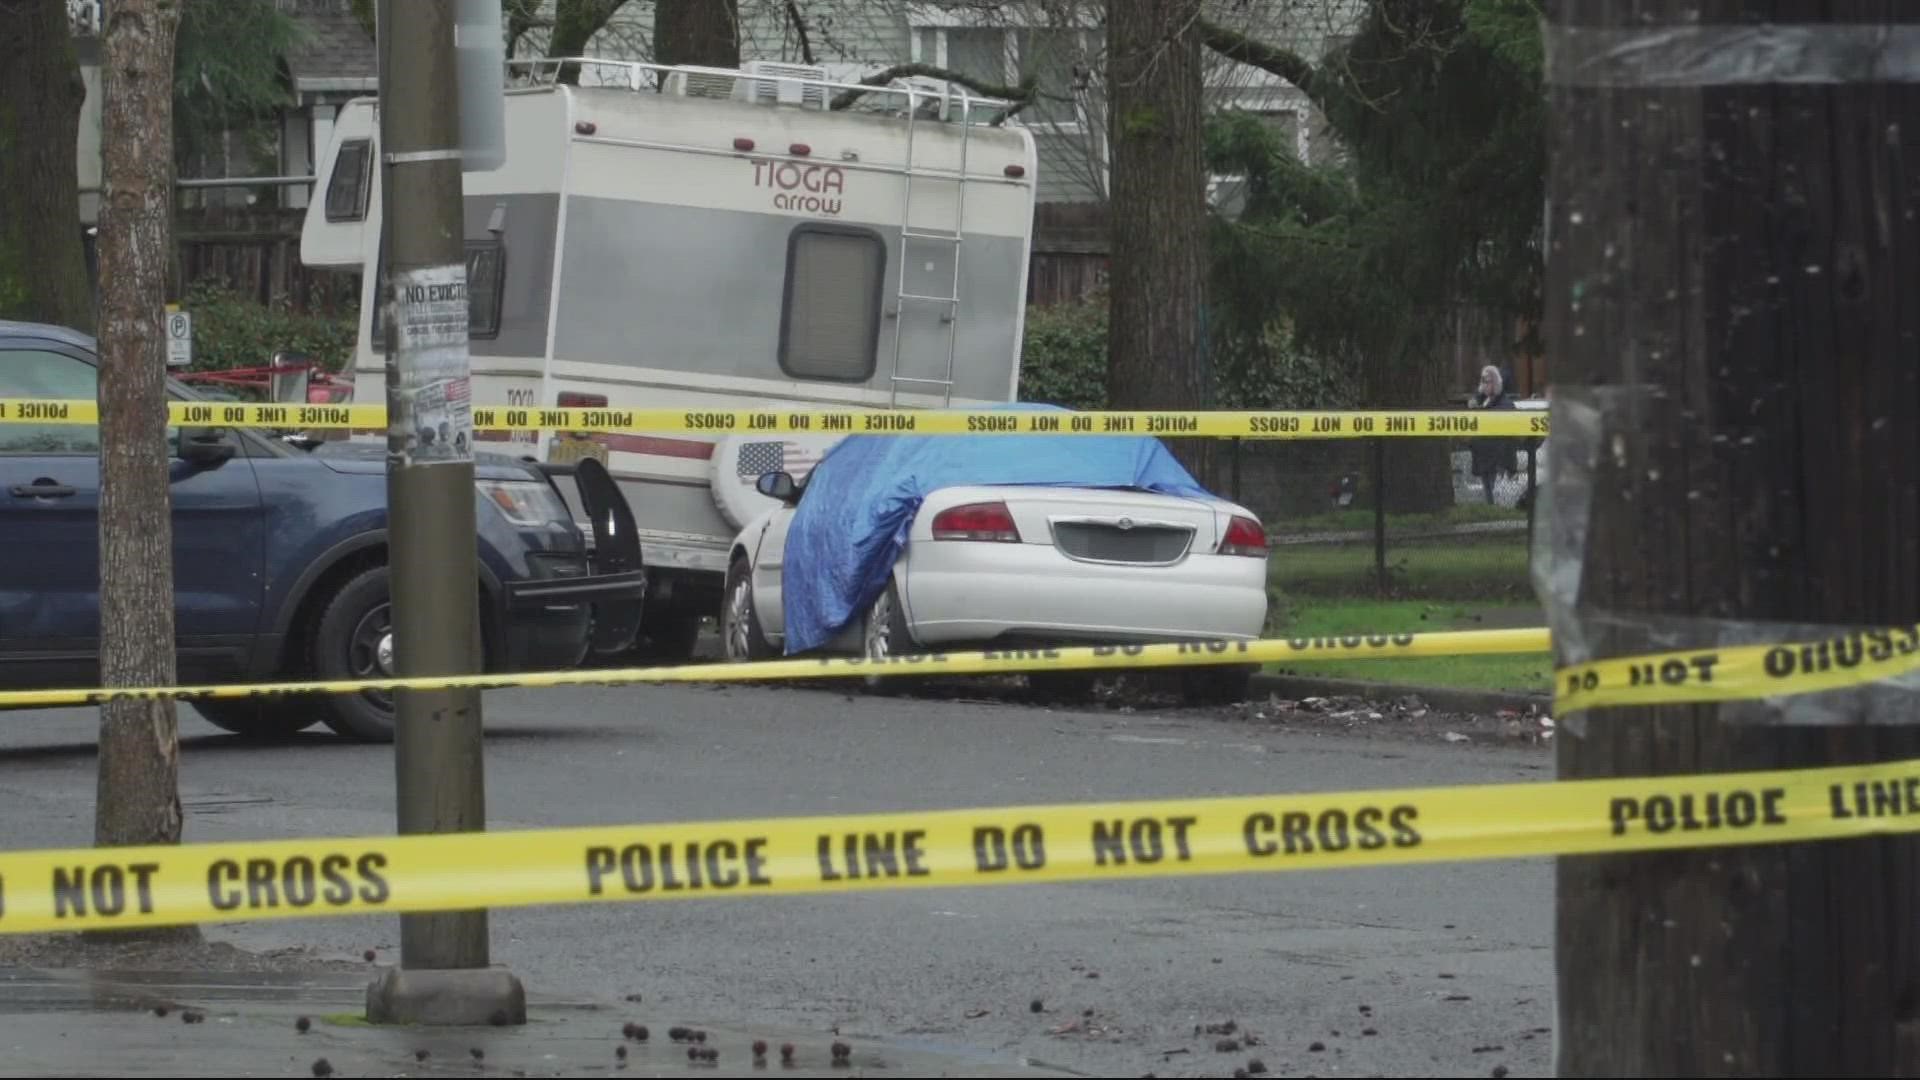 A fatal shooting near Dawson Park in North Portland has left one dead, according to witnesses at the scene.